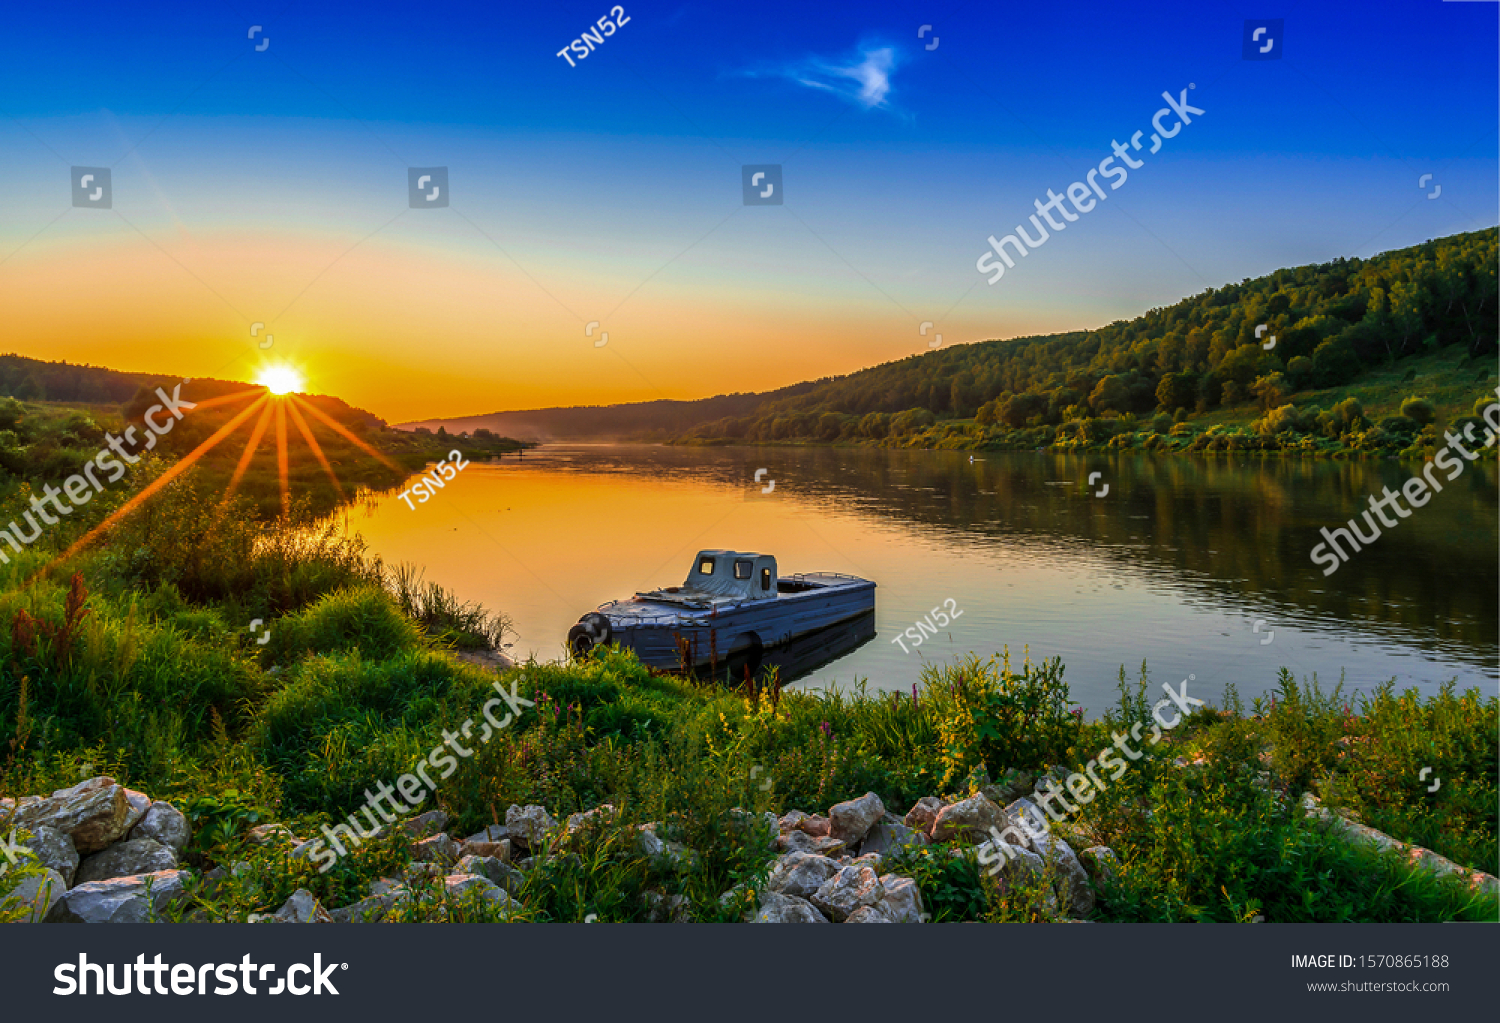 River boat at yellow sunset #1570865188